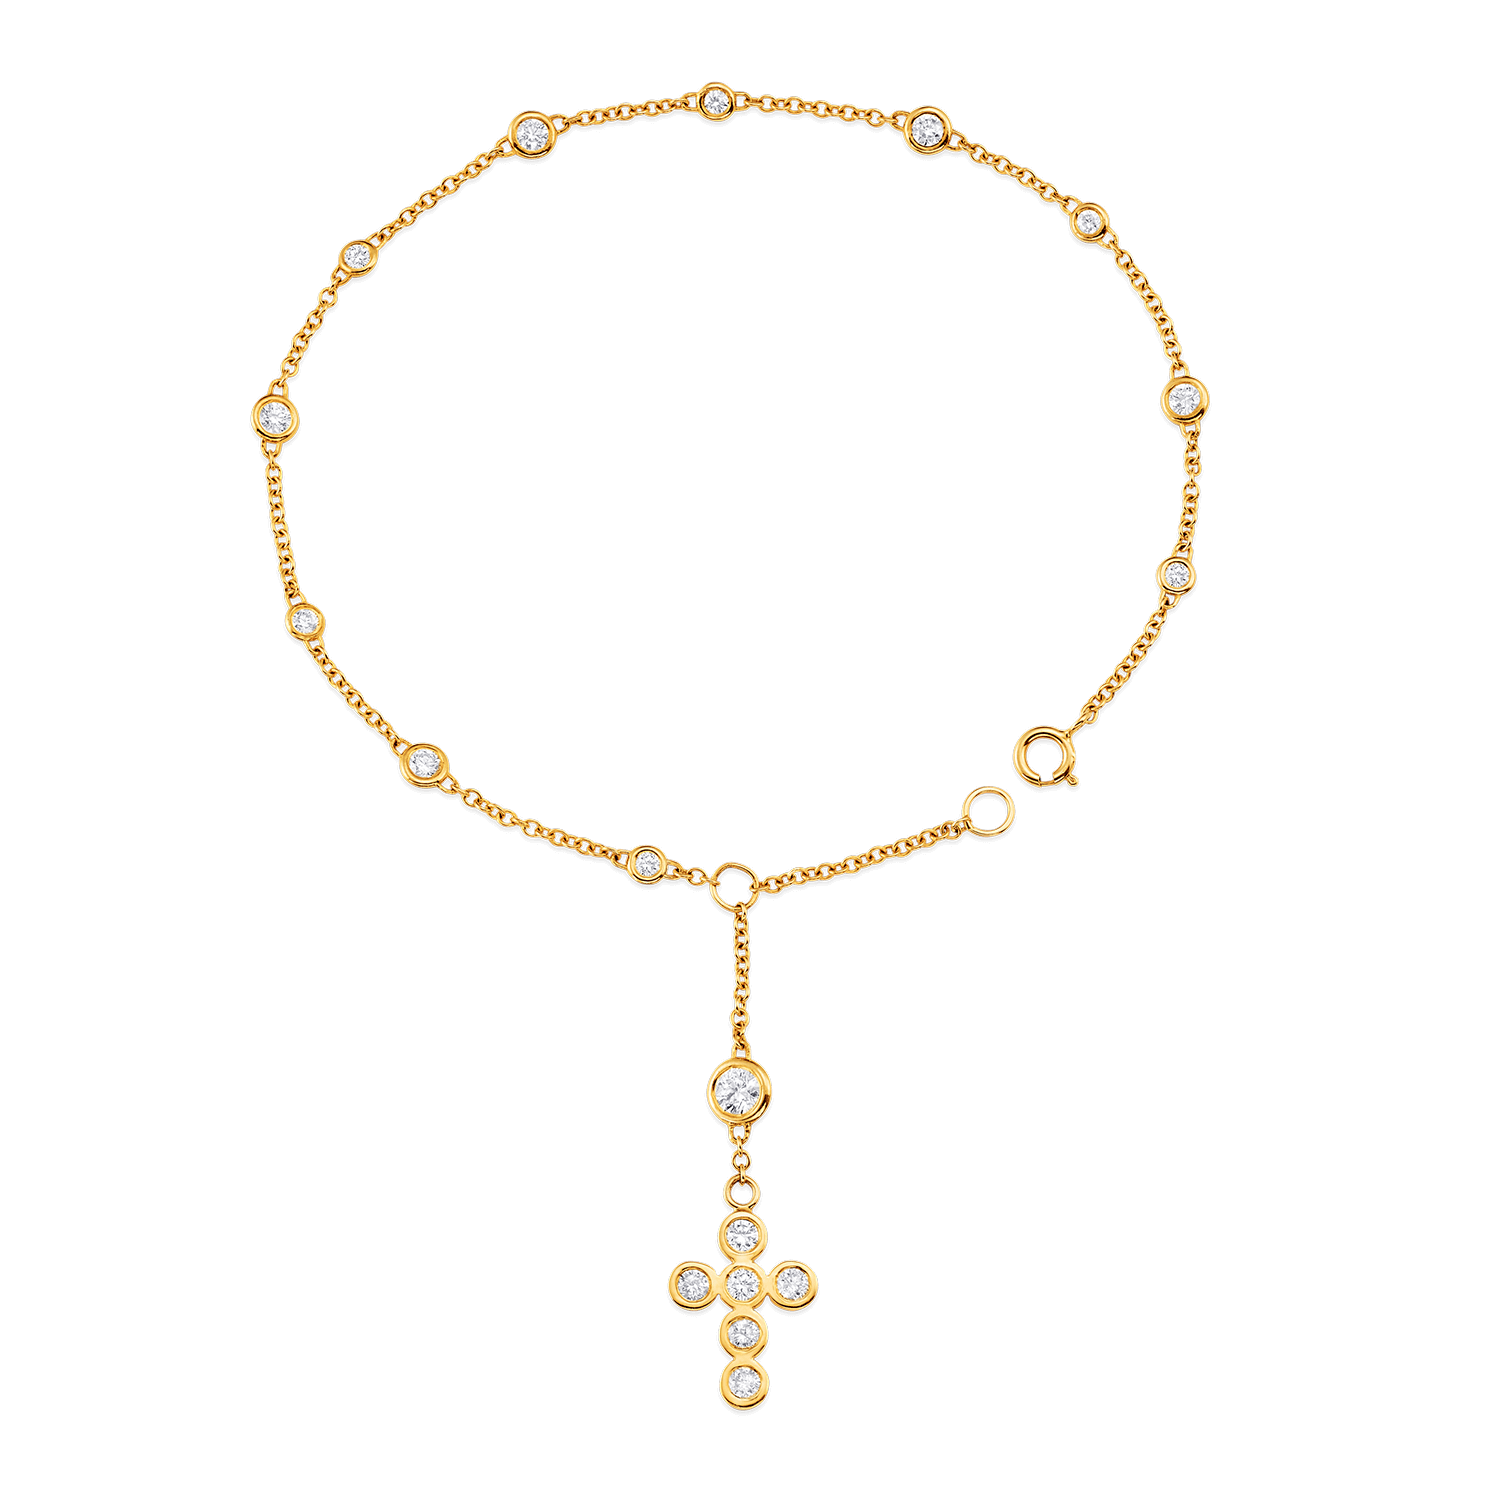 Rosary Cuff Bracelet with Miraculous Medal of Our Lady of Graces and Cross  gr 0,9 Yellow Gold 9k Unisex Woman Man | Vaticanum.com